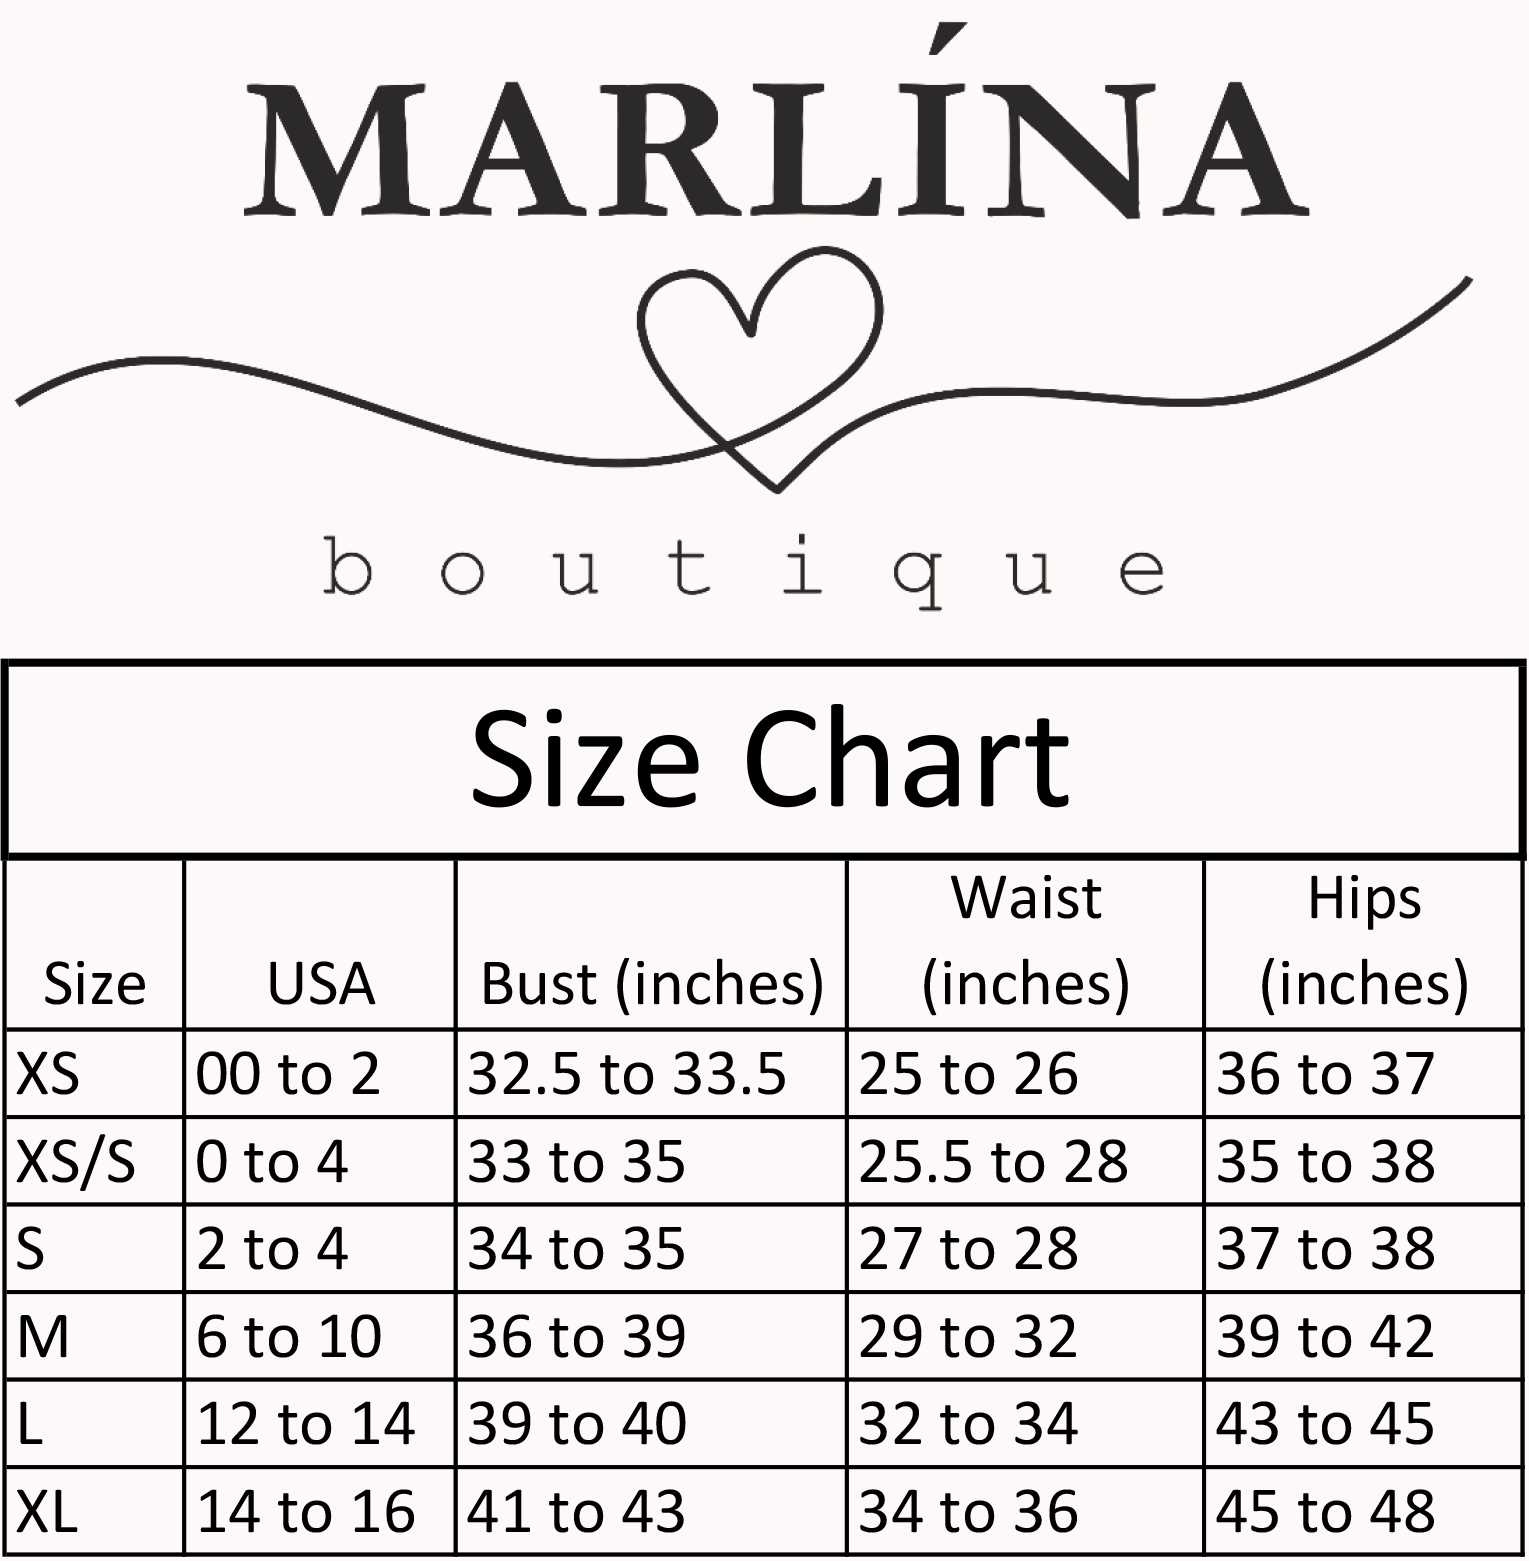 Marlina Boutique Size Chart